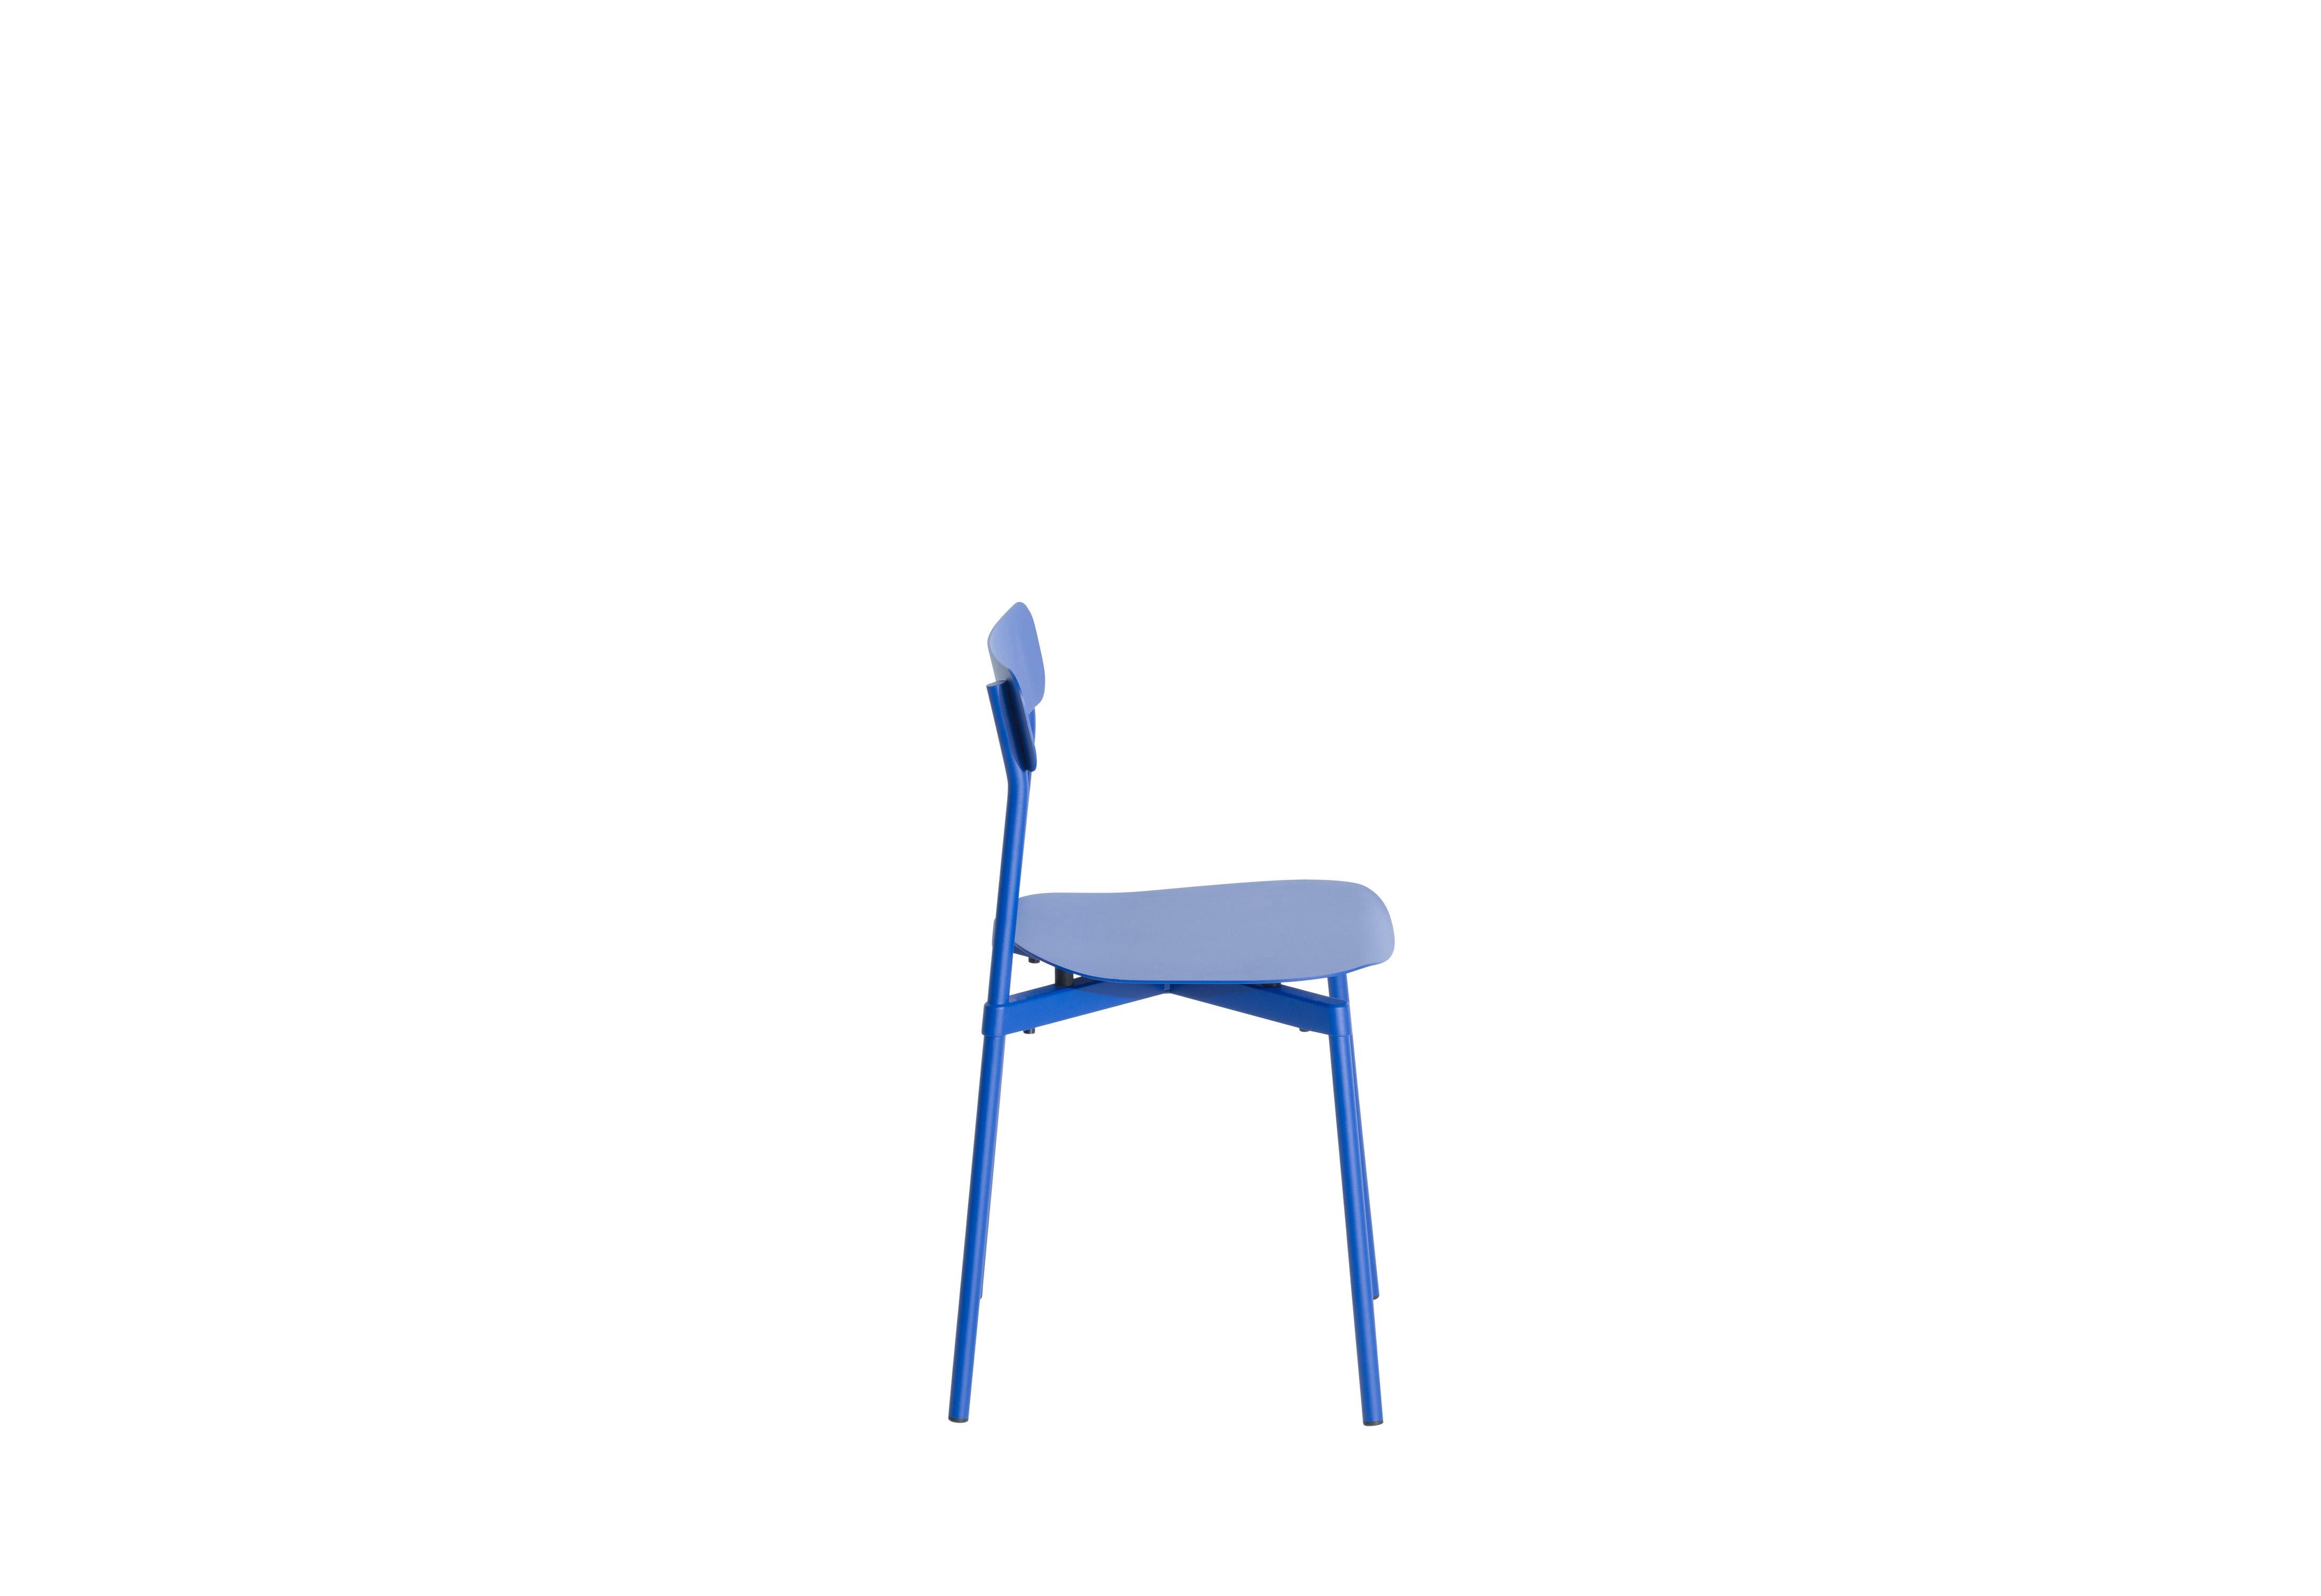 Petite Friture Fromme Chair in Blue Aluminium by Tom Chung, 2019

The Fromme chair stands out by its pure line and compact design. Absorbers placed under the seating gives a soft and very comfortable flexibility to the chair. Made from aluminium,